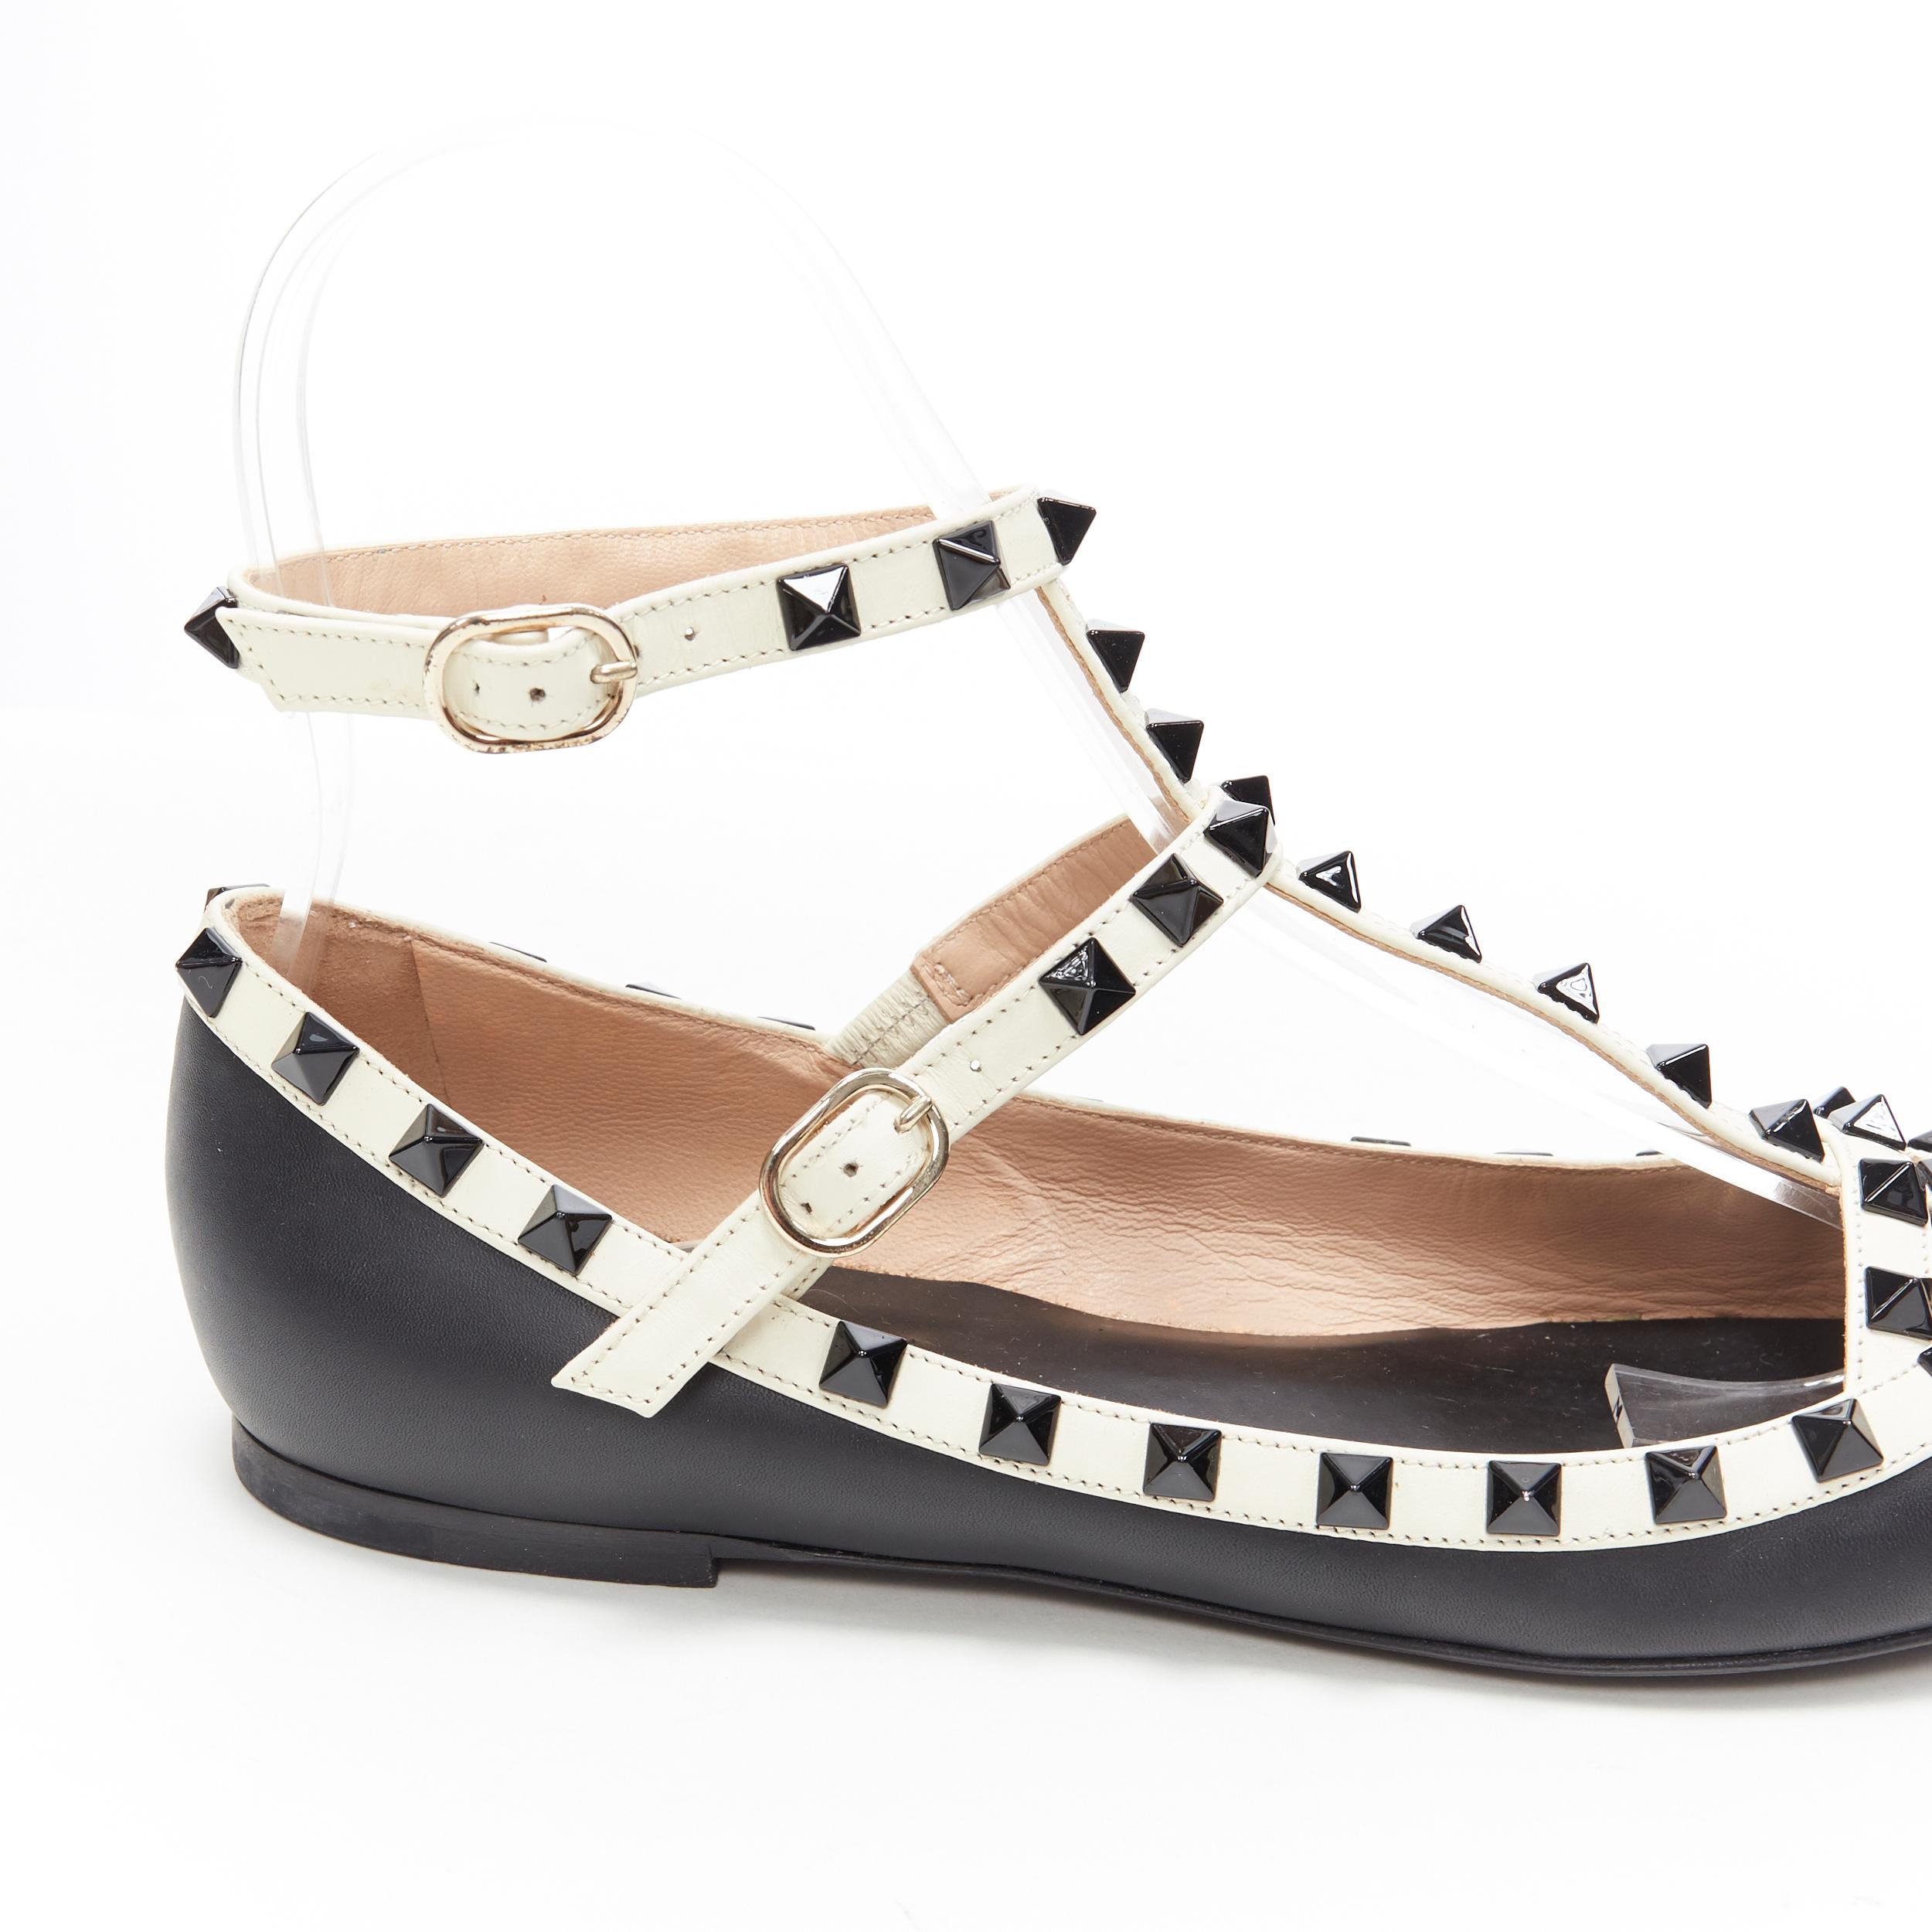 VALENTINO Rockstud black white studded caged strappy pointed flat shoes EU38.5 2